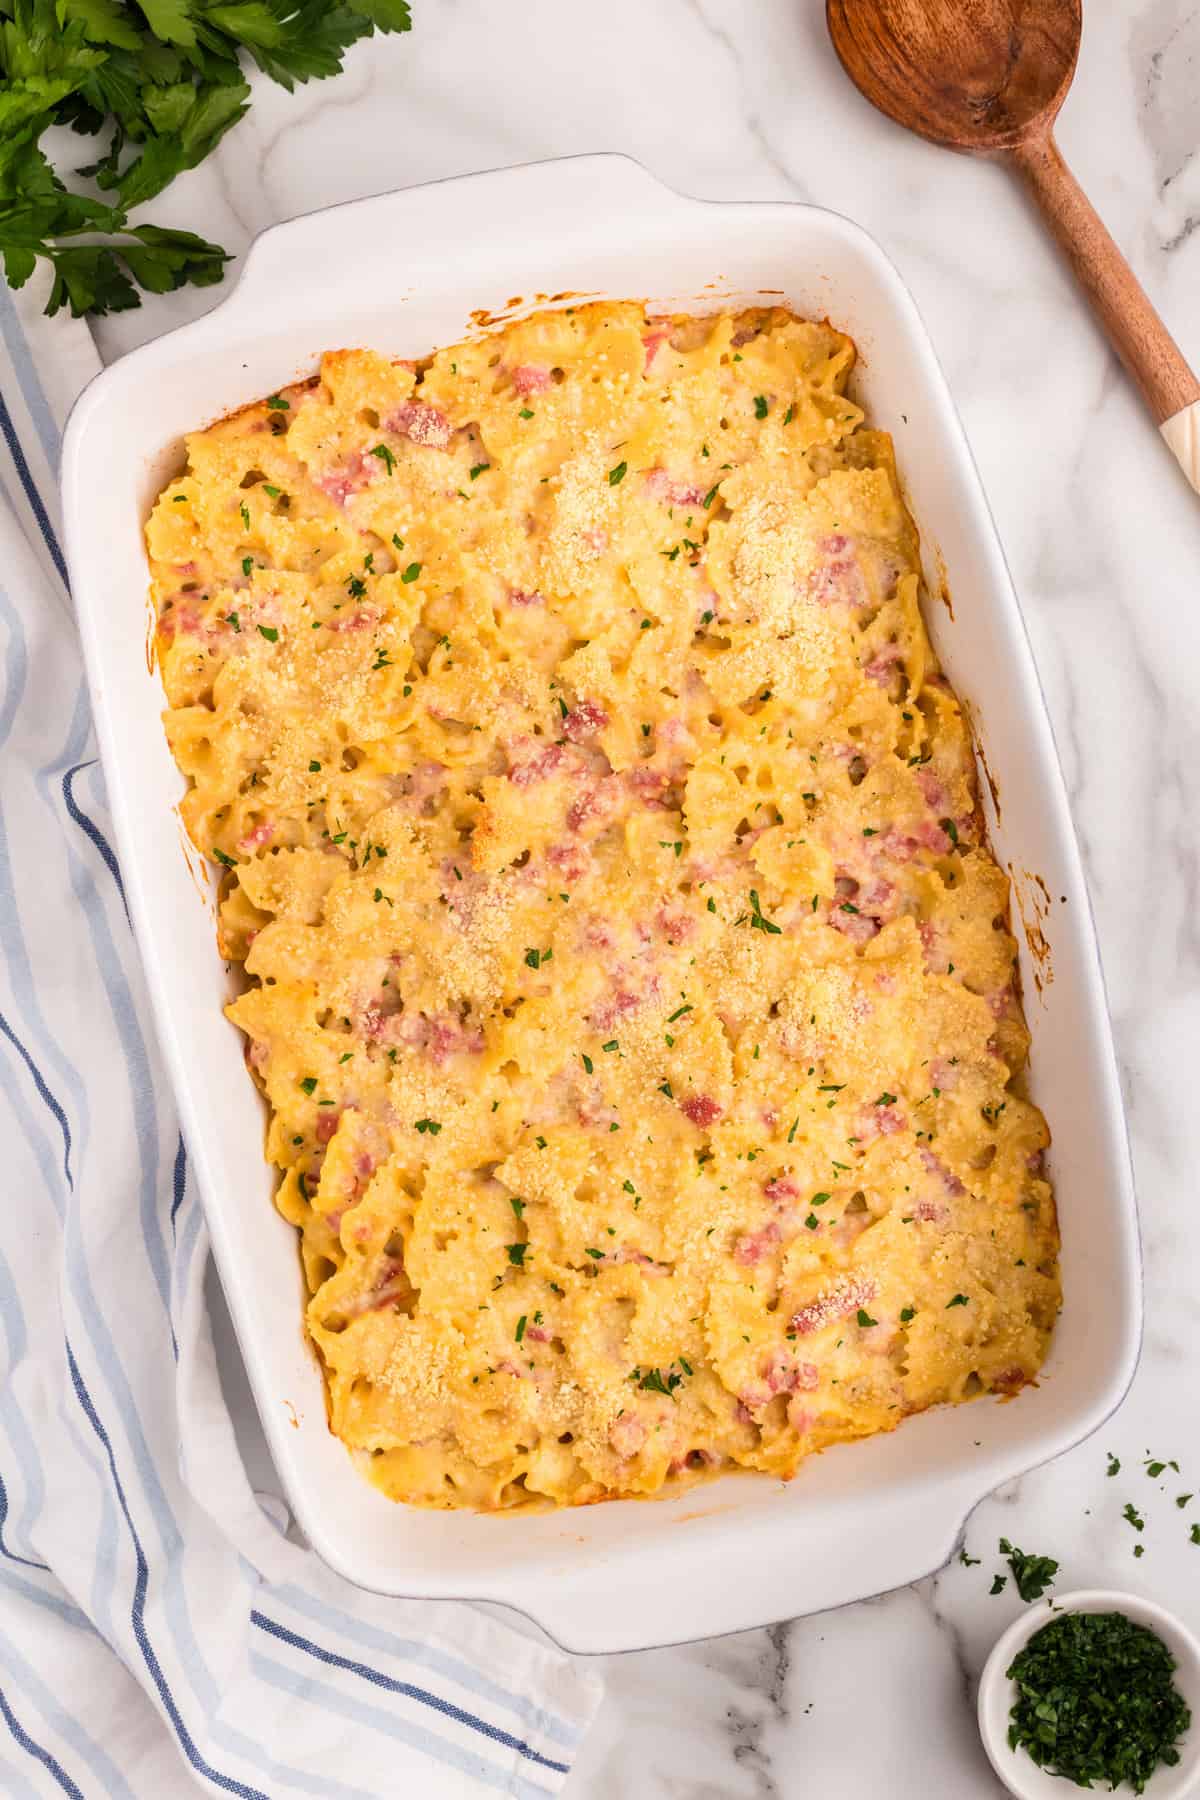 Cheesy Ham Casserole baked to a golden brown in 9x13 baking dish